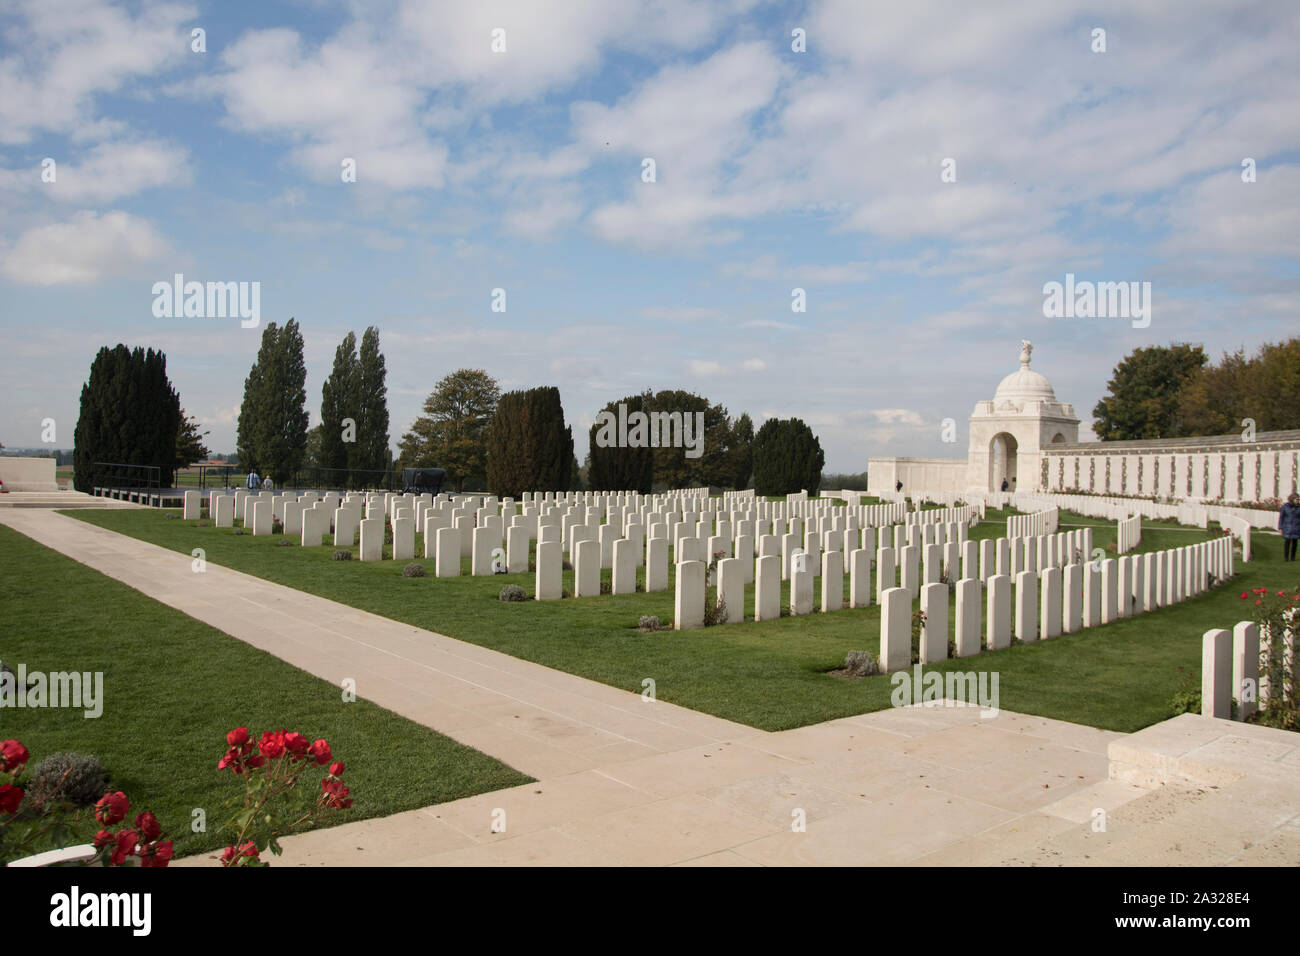 Zonnebeke, Belgium, 09/10/2017. Tyne Cot Cemetery, the largest Commonwealth war cemetery in the world in terms of burials. The Tyne Cot Memorial Stock Photo